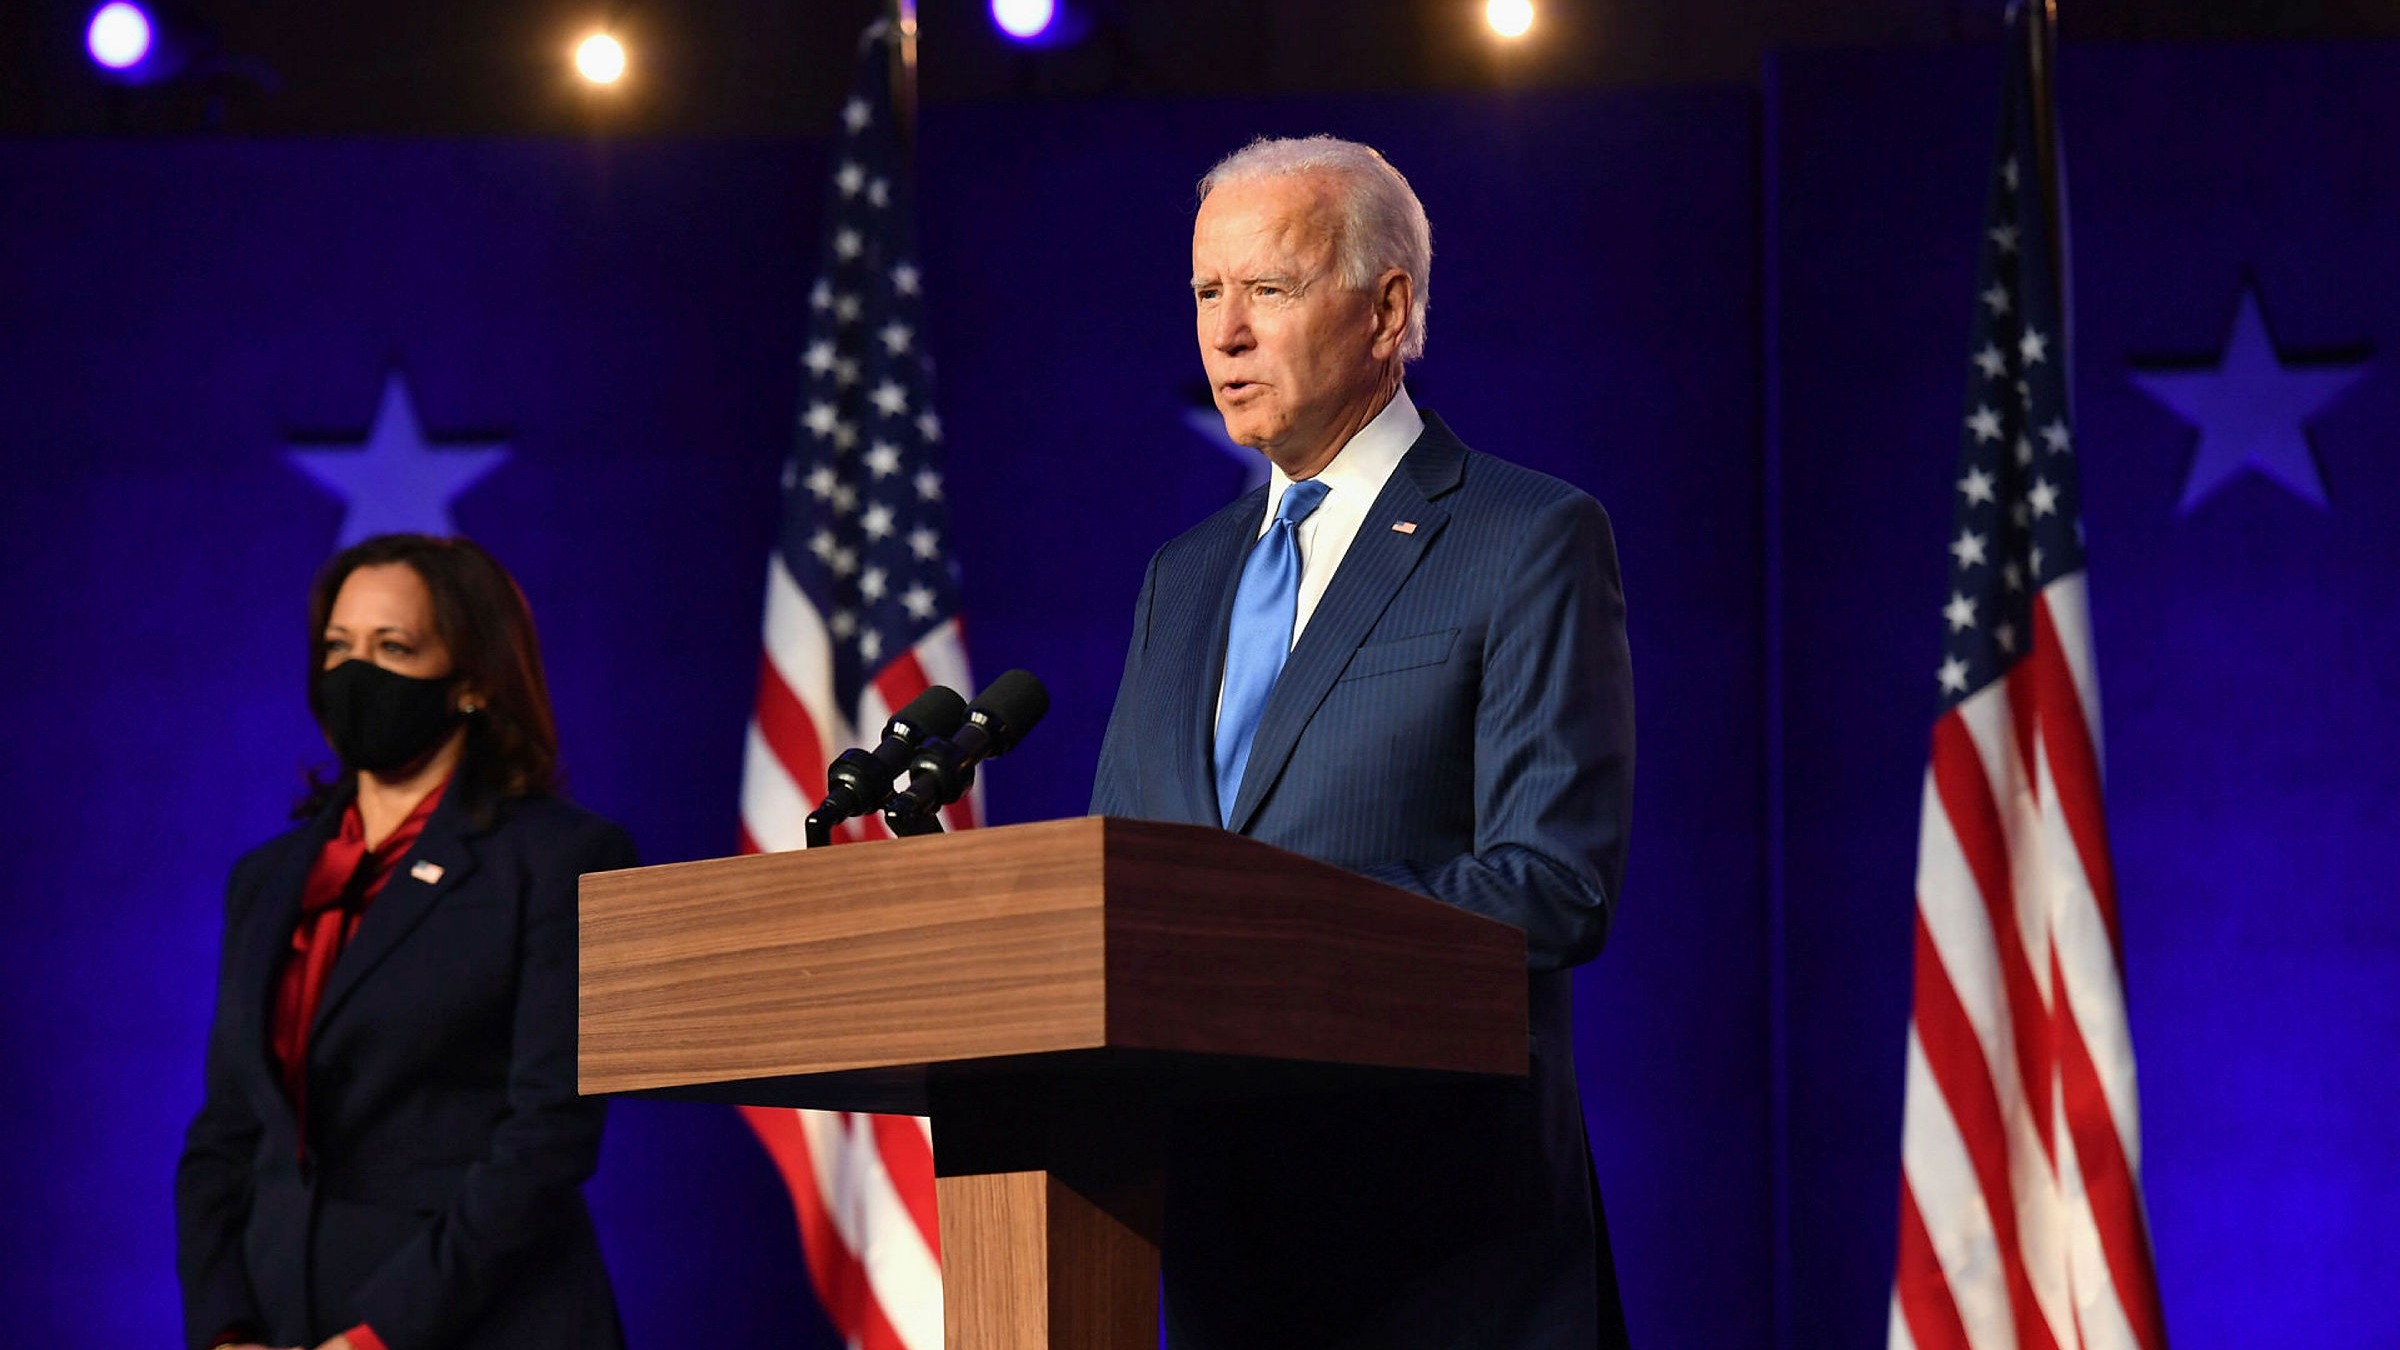 Biden Promises New Course For Divided US